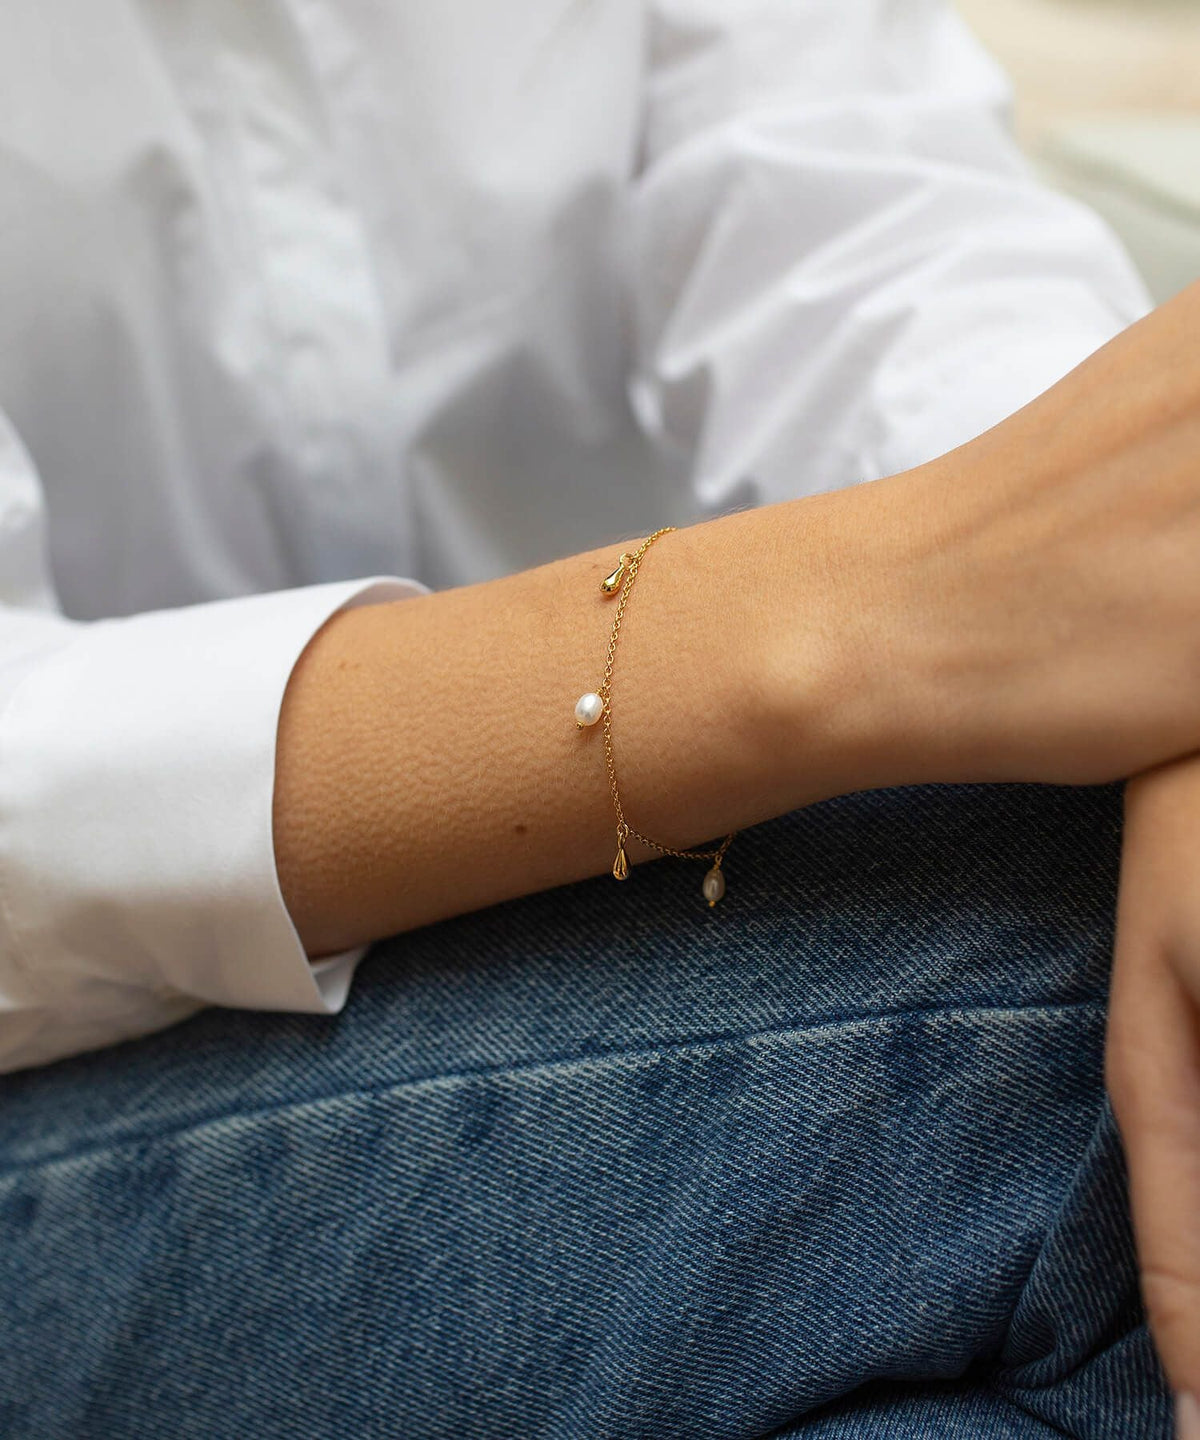 Delicate gold bracelet with pearl and gold teardrop charms